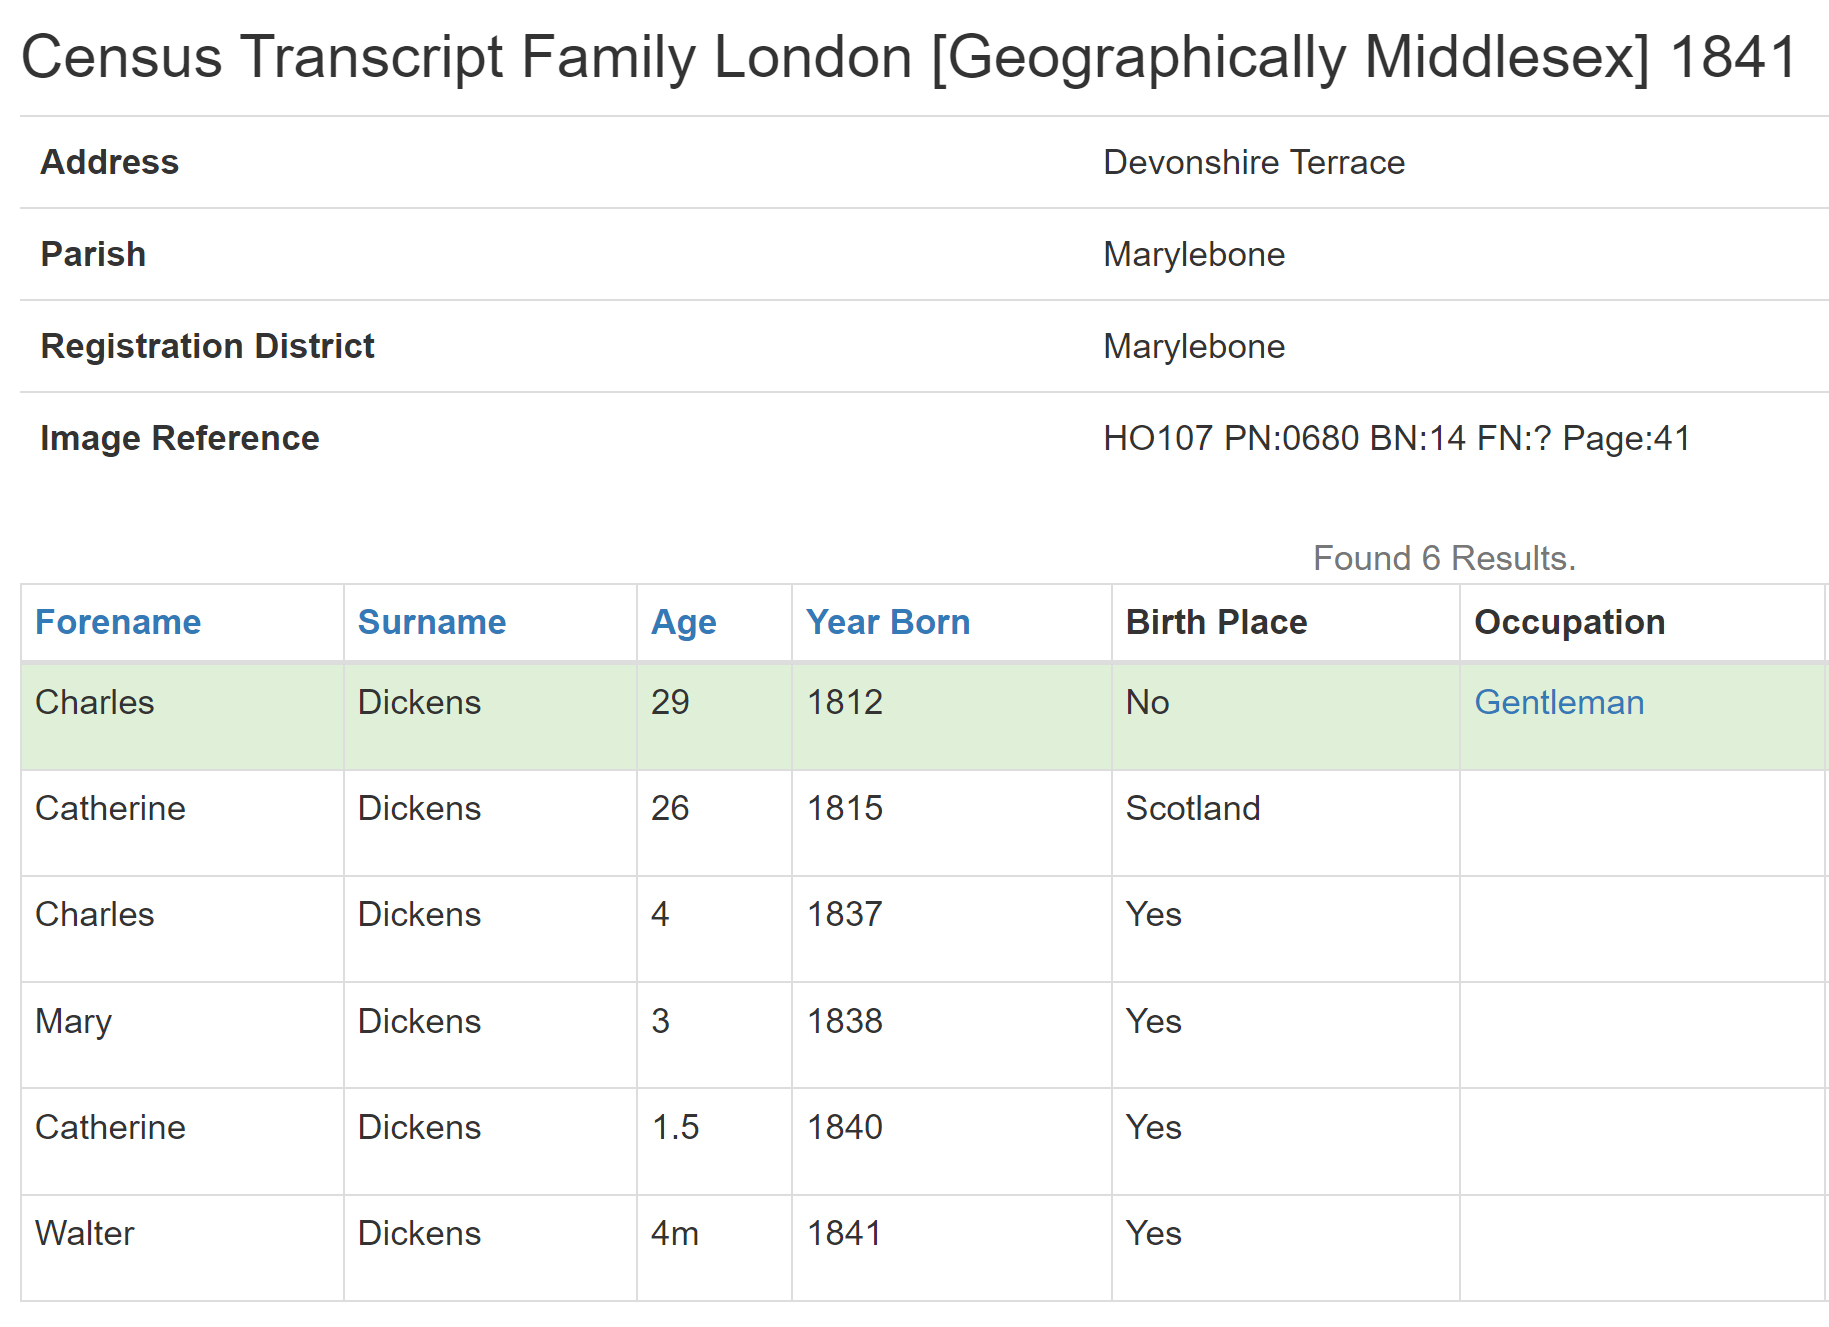 Charles Dickens & family in the 1841 Census